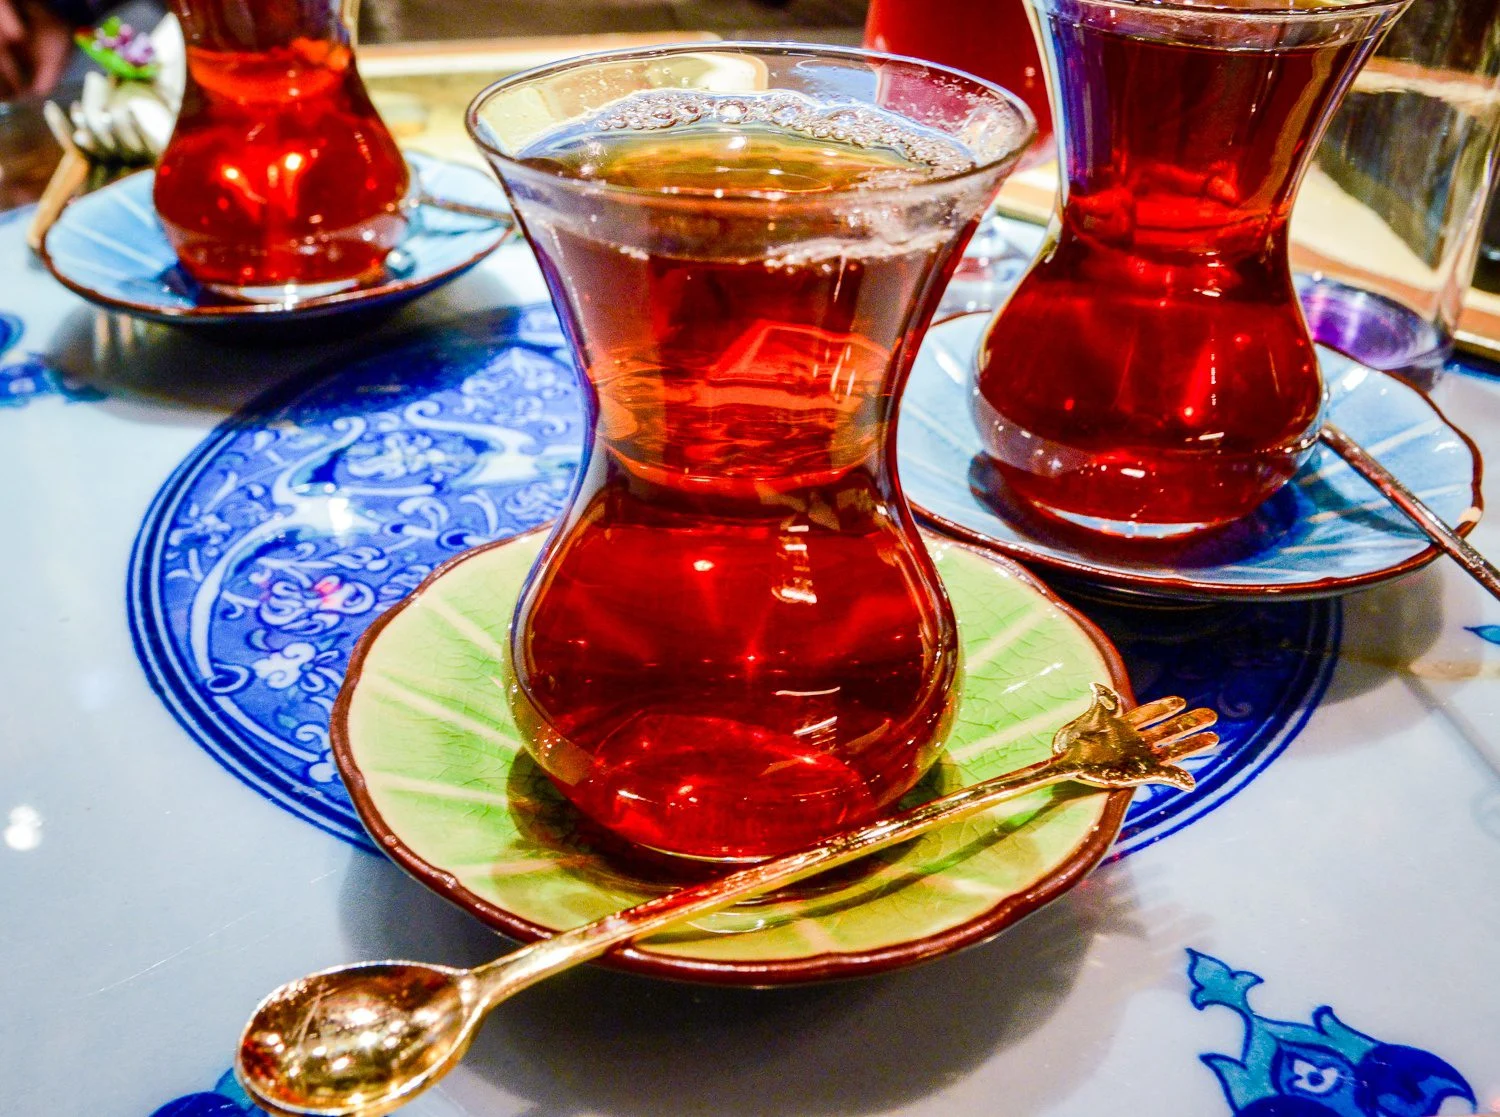 Turkish tea, which was essentially Chris's life fuel in Istanbul.